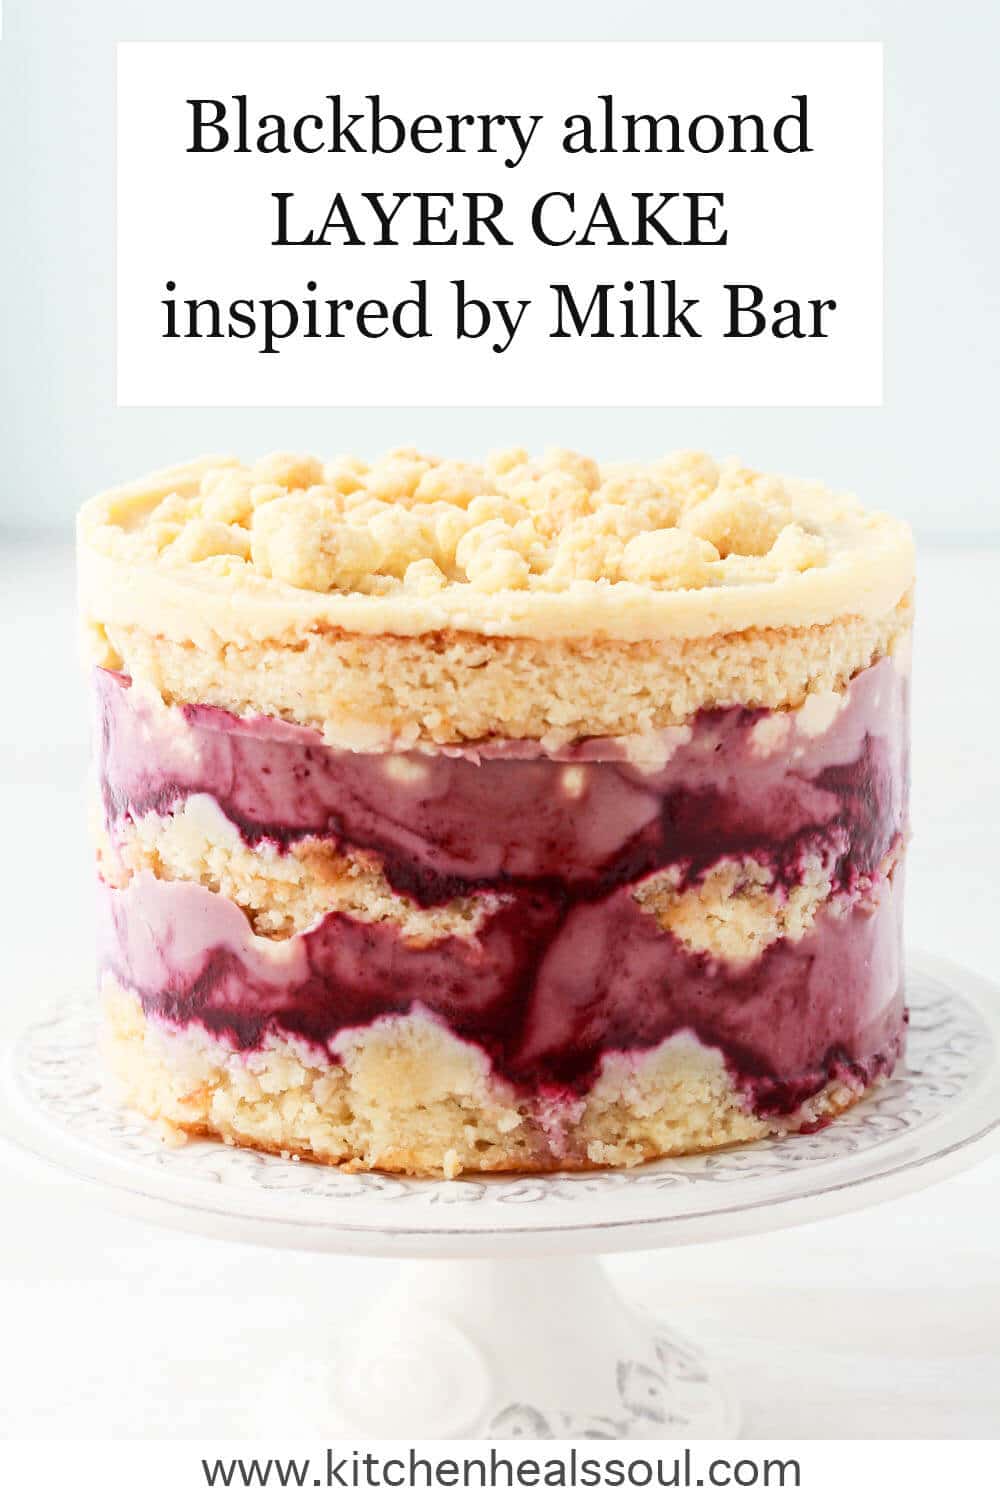 Milk Bar style naked cake featuring layers of almond cake, almond frosting, blackberry lemon curd, and blackberry purée for a stunning purple and creamy beige layer cake